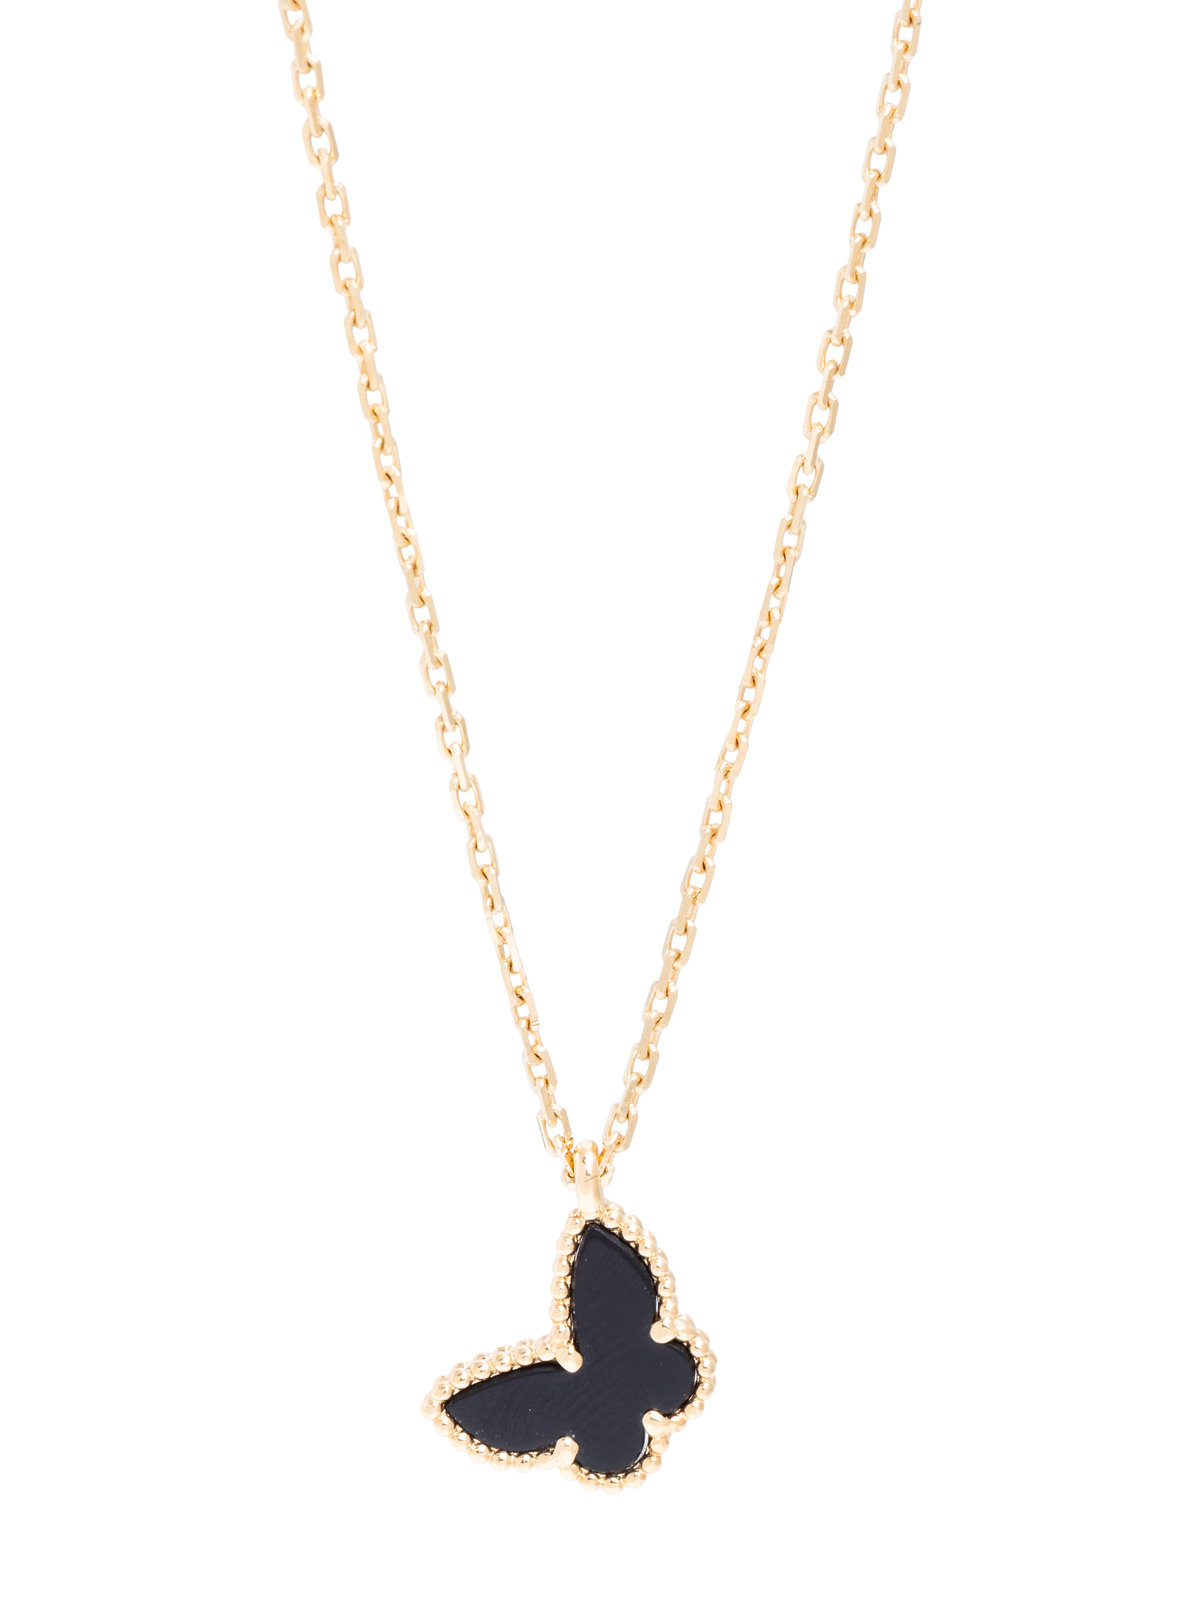 Sold at Auction: Van Cleef & Arpels Alhambra Two Butterfly Pendant Necklace  18K yellow gold, Diamond